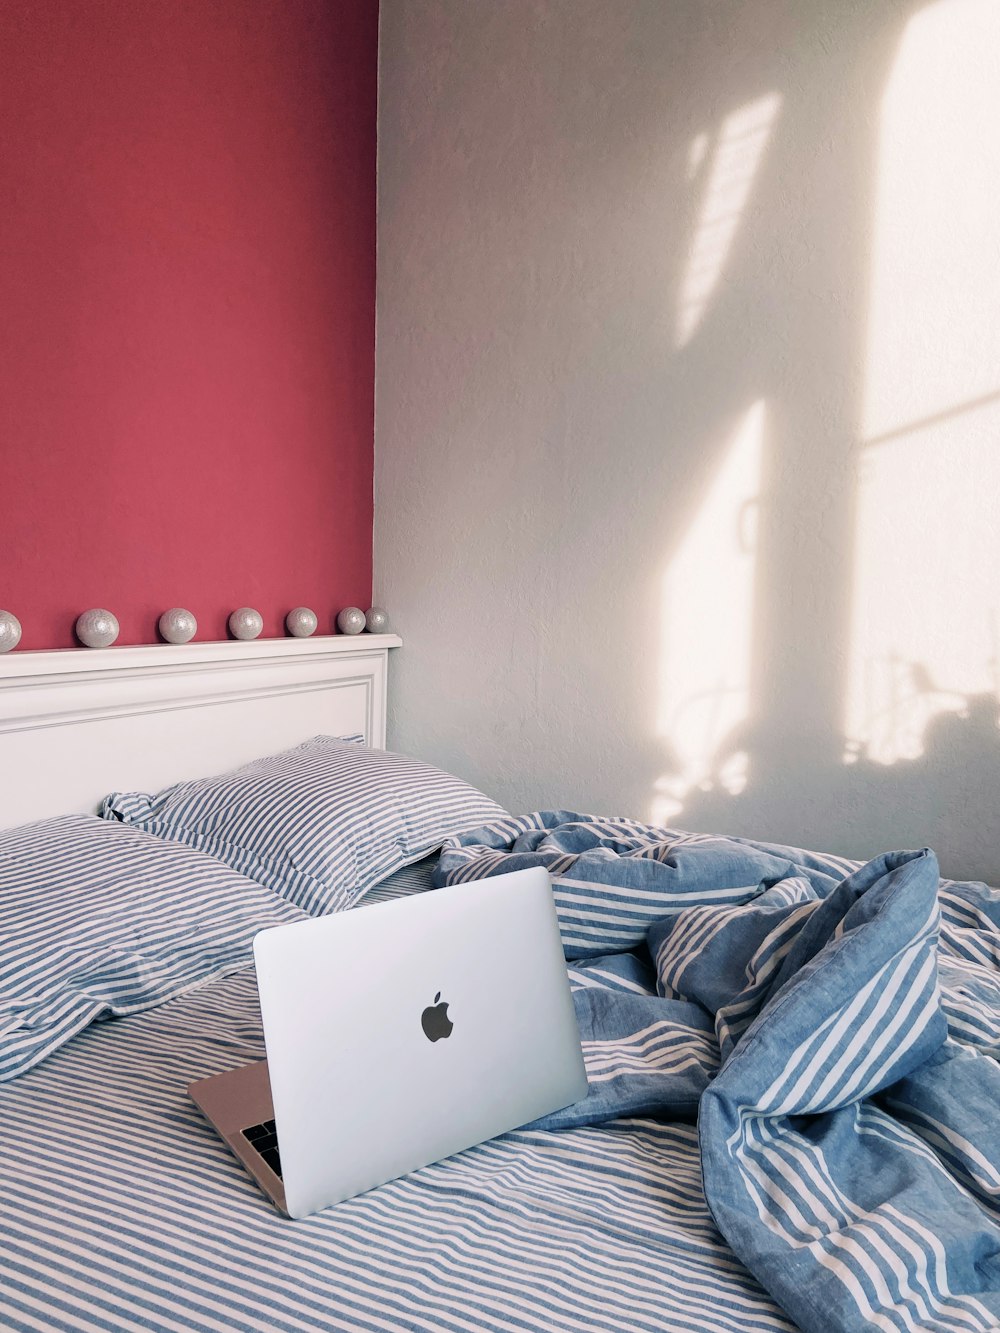 silver macbook on blue and white bed linen